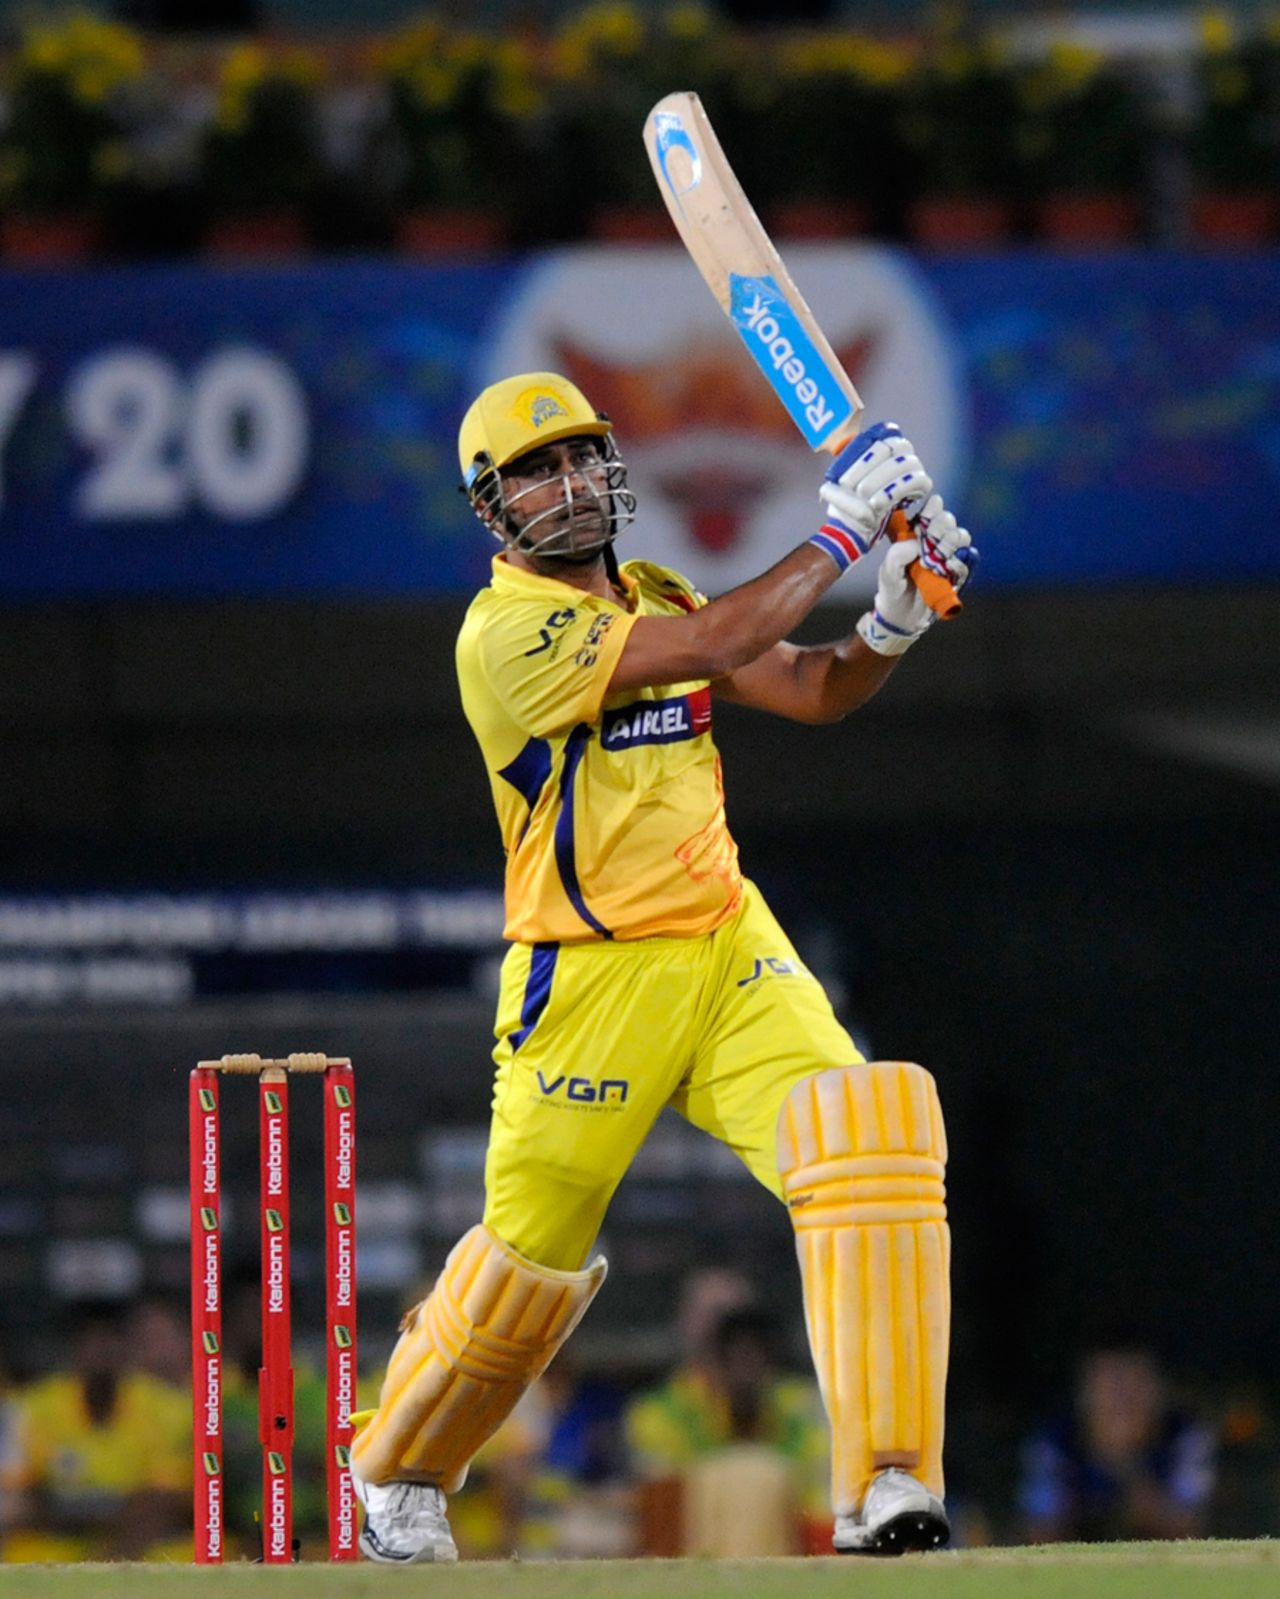 MS Dhoni deposits one in the Ranchi crowd, Chennai Super Kings v Sunrisers Hyderabad, Group B, Champions League 2013, Ranchi, September 26, 2013